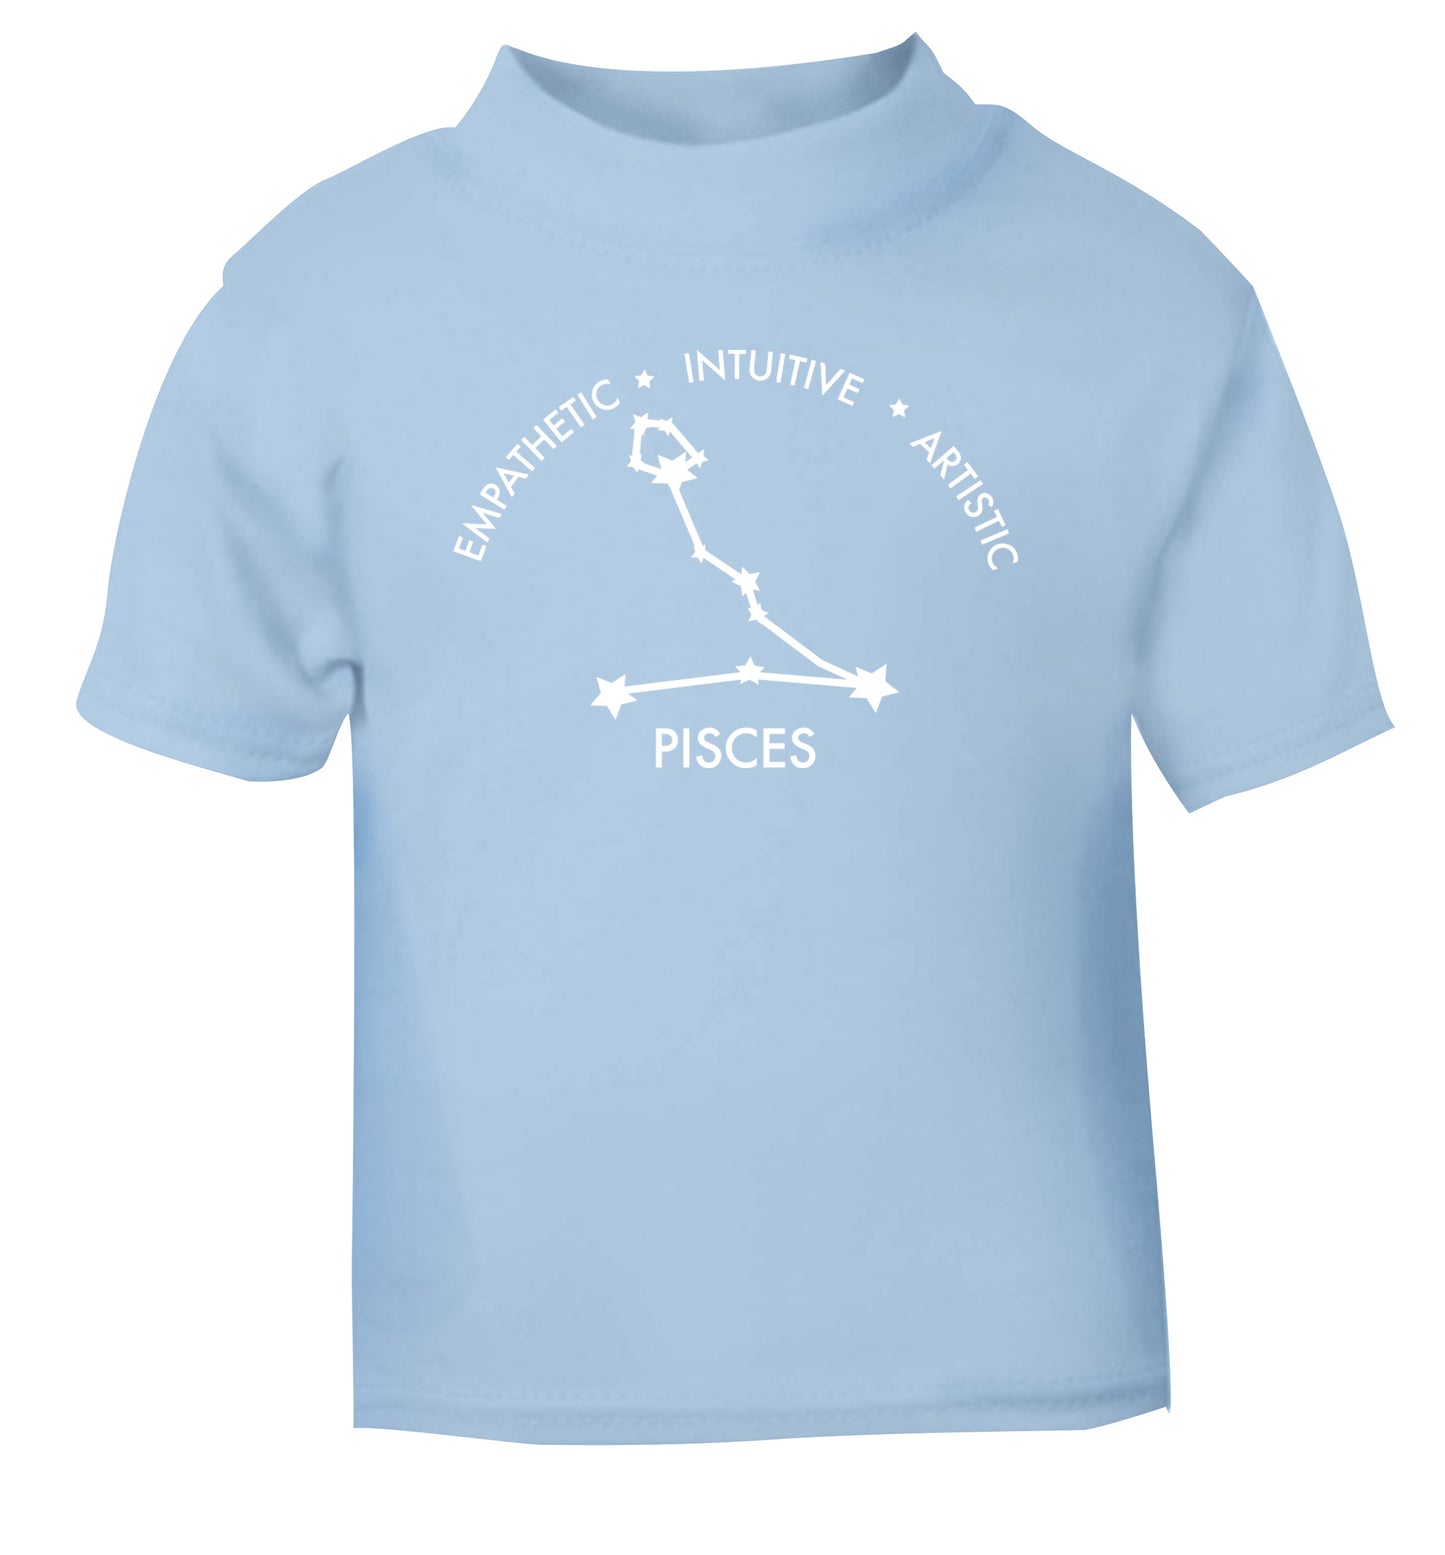 Pisces: Empathetic | Intuitive | Artistic light blue Baby Toddler Tshirt 2 Years